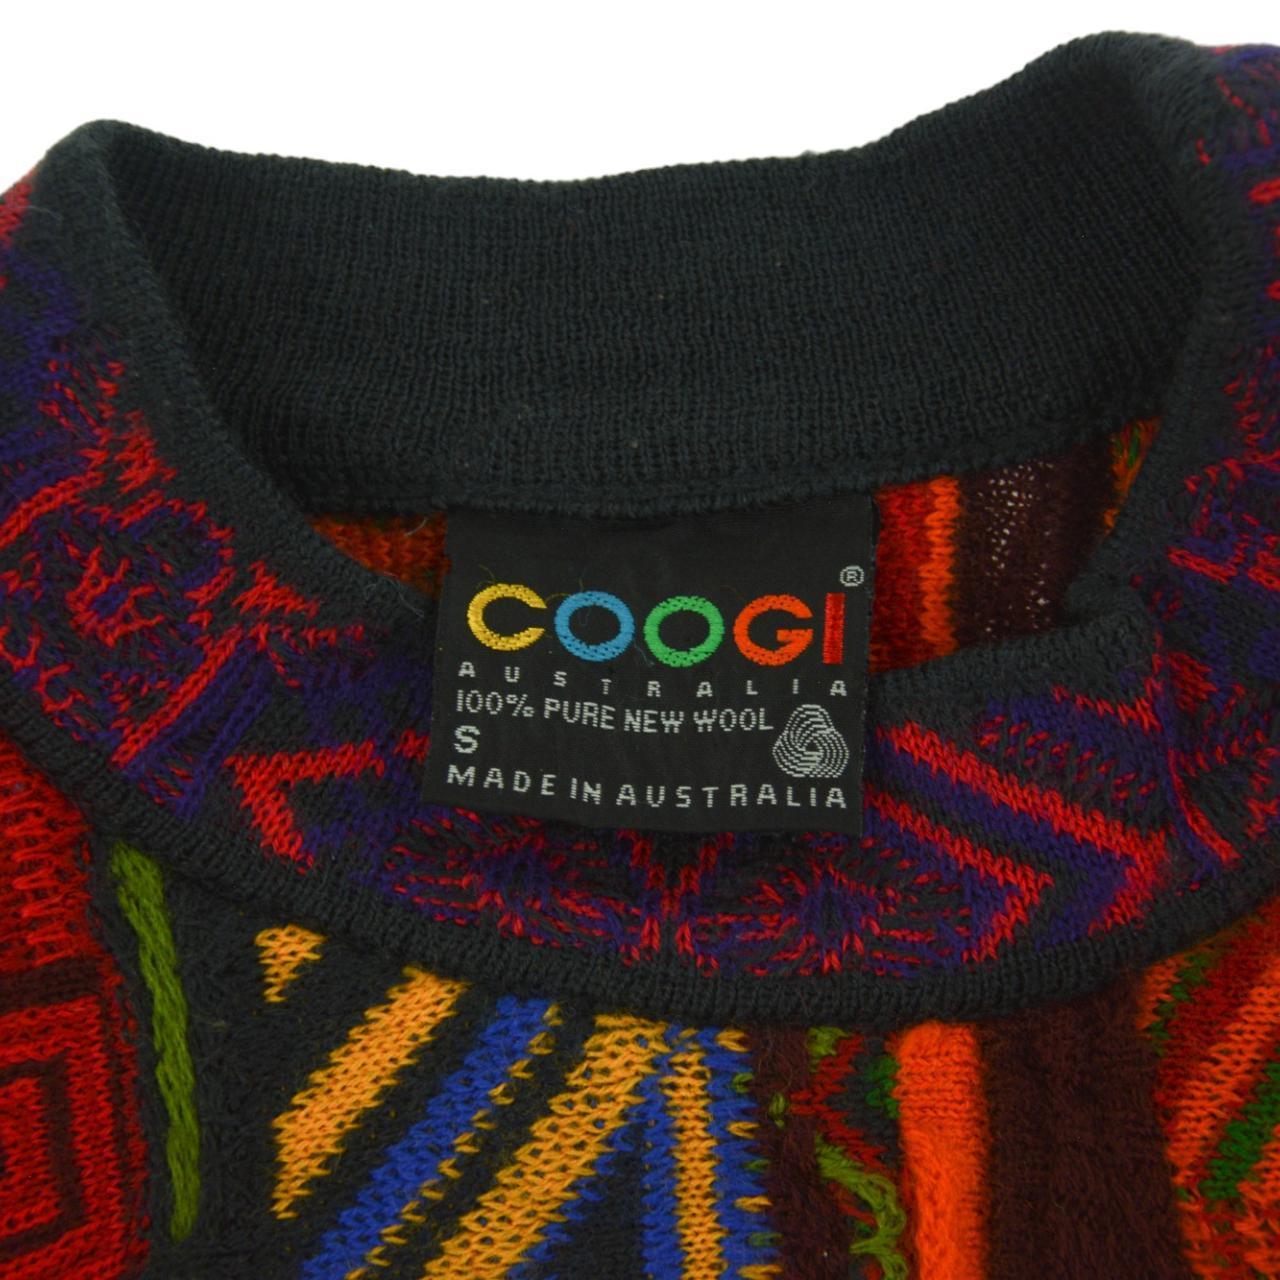 Vintage Coogi Knit Jumpers Size M - Known Source